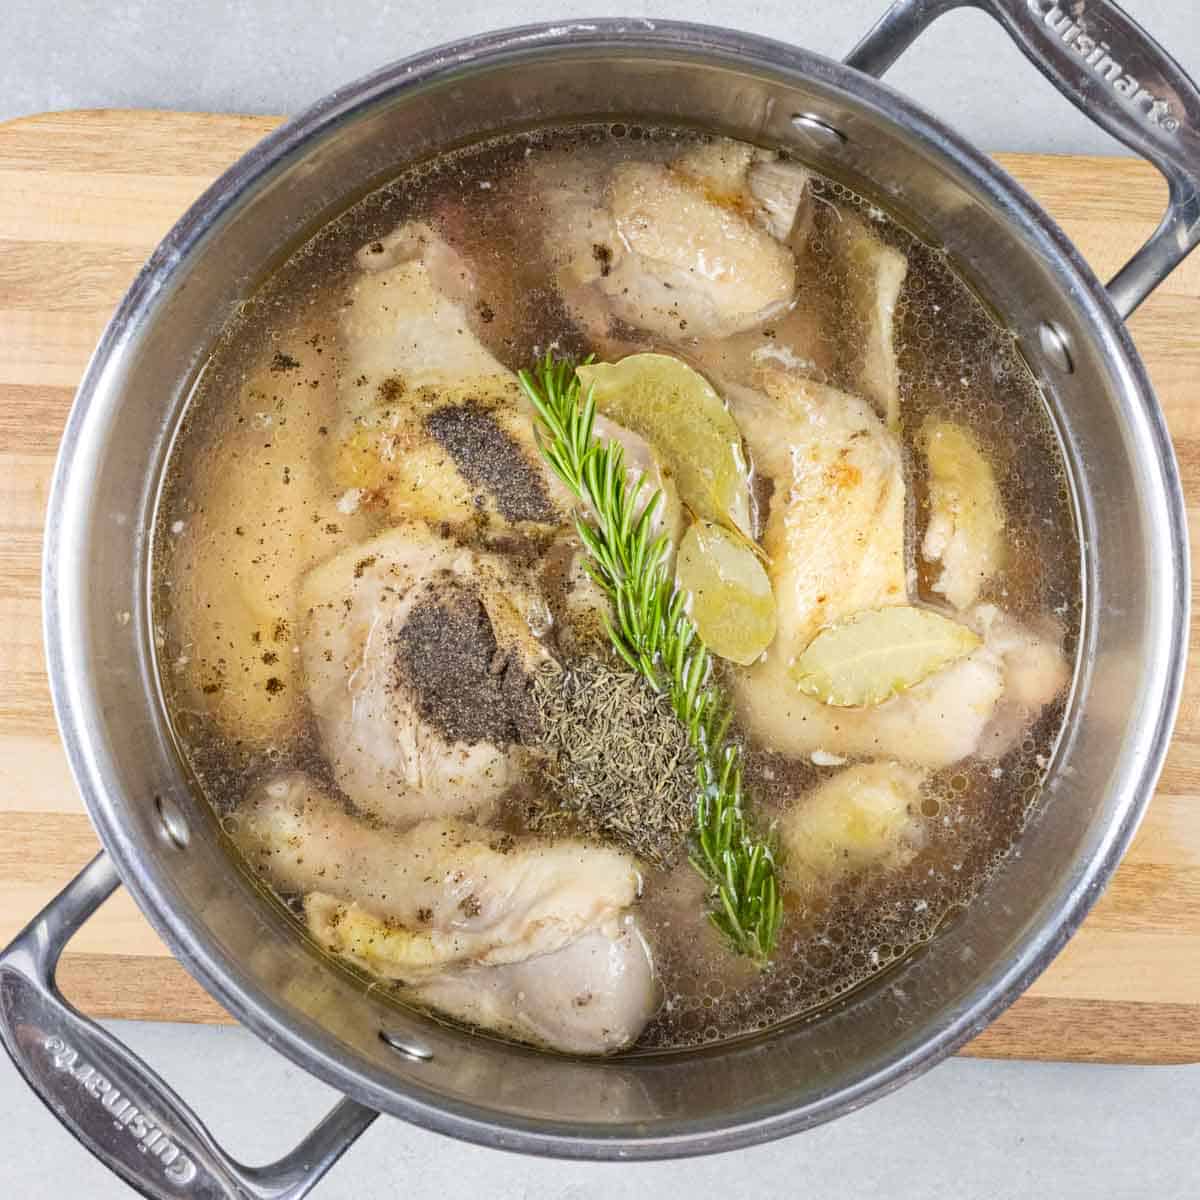 Chicken, herbs and broth in soup pot to simmer for Spanish soup.